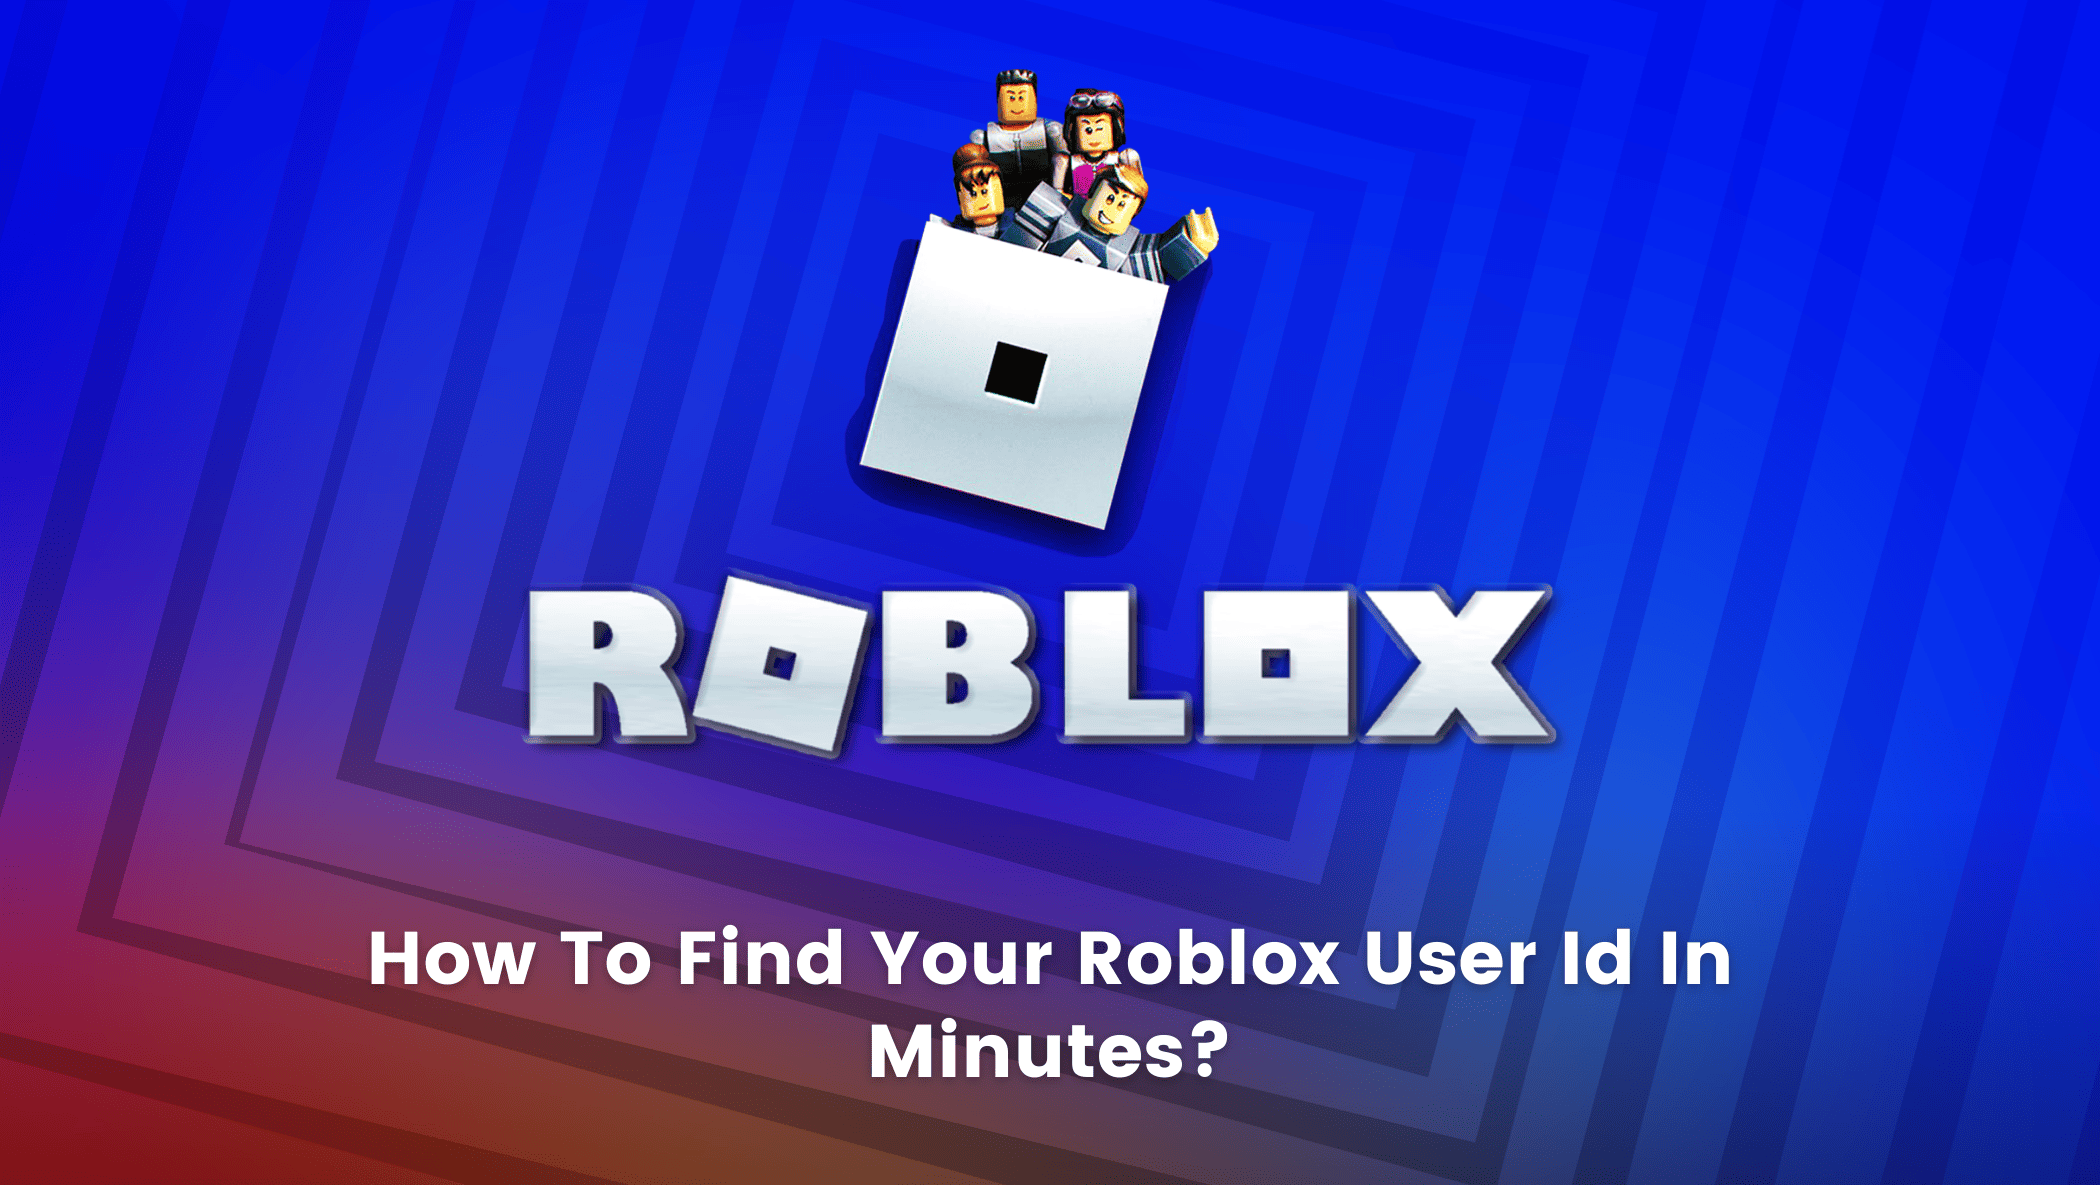 How To Find Your Roblox User Id In Minutes